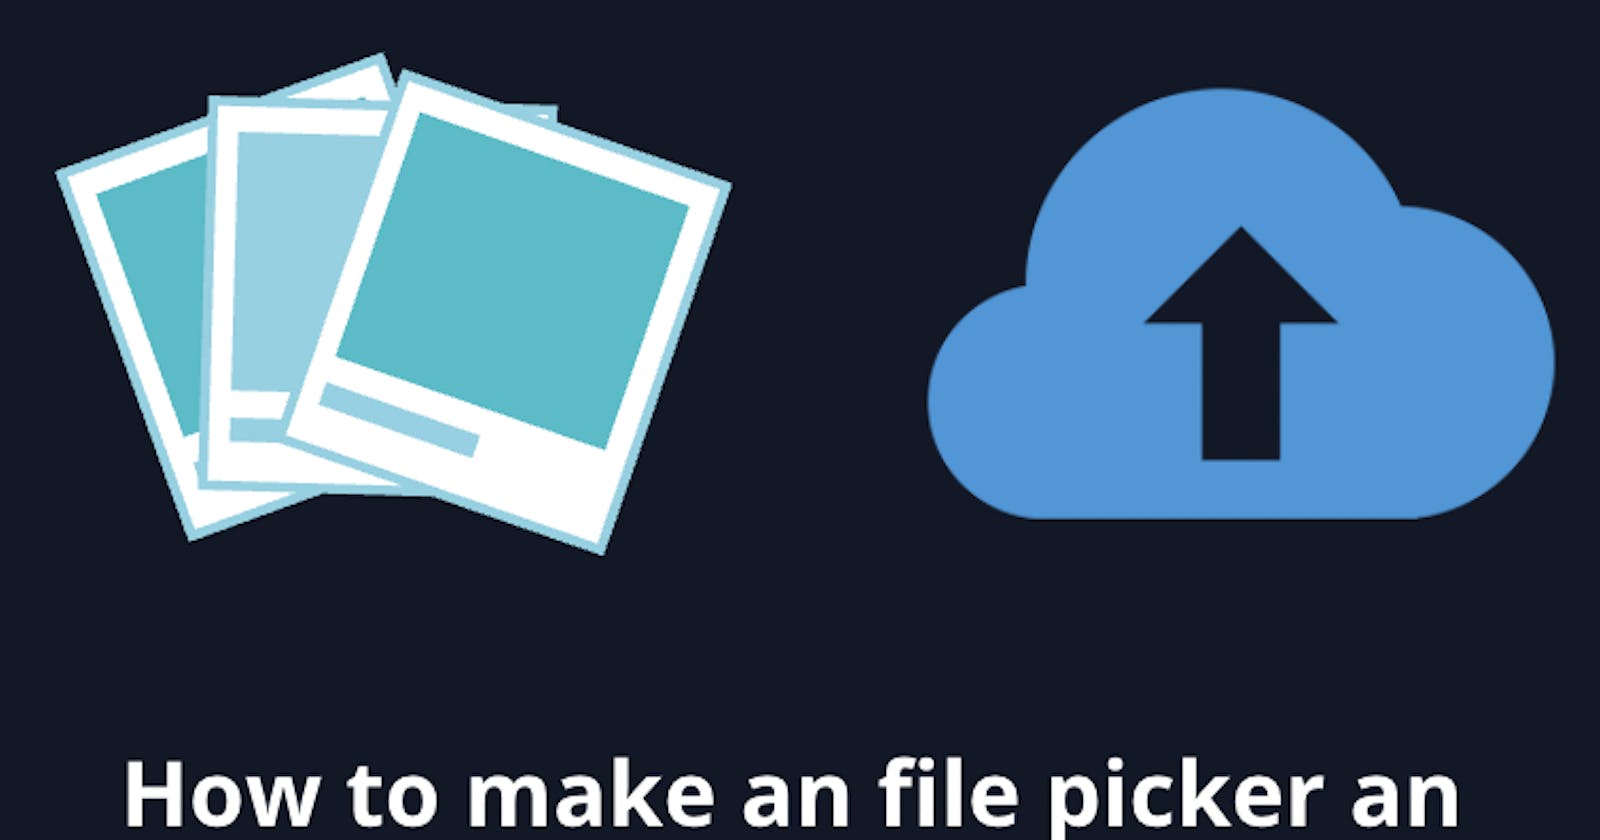 How to make an file picker an image picker